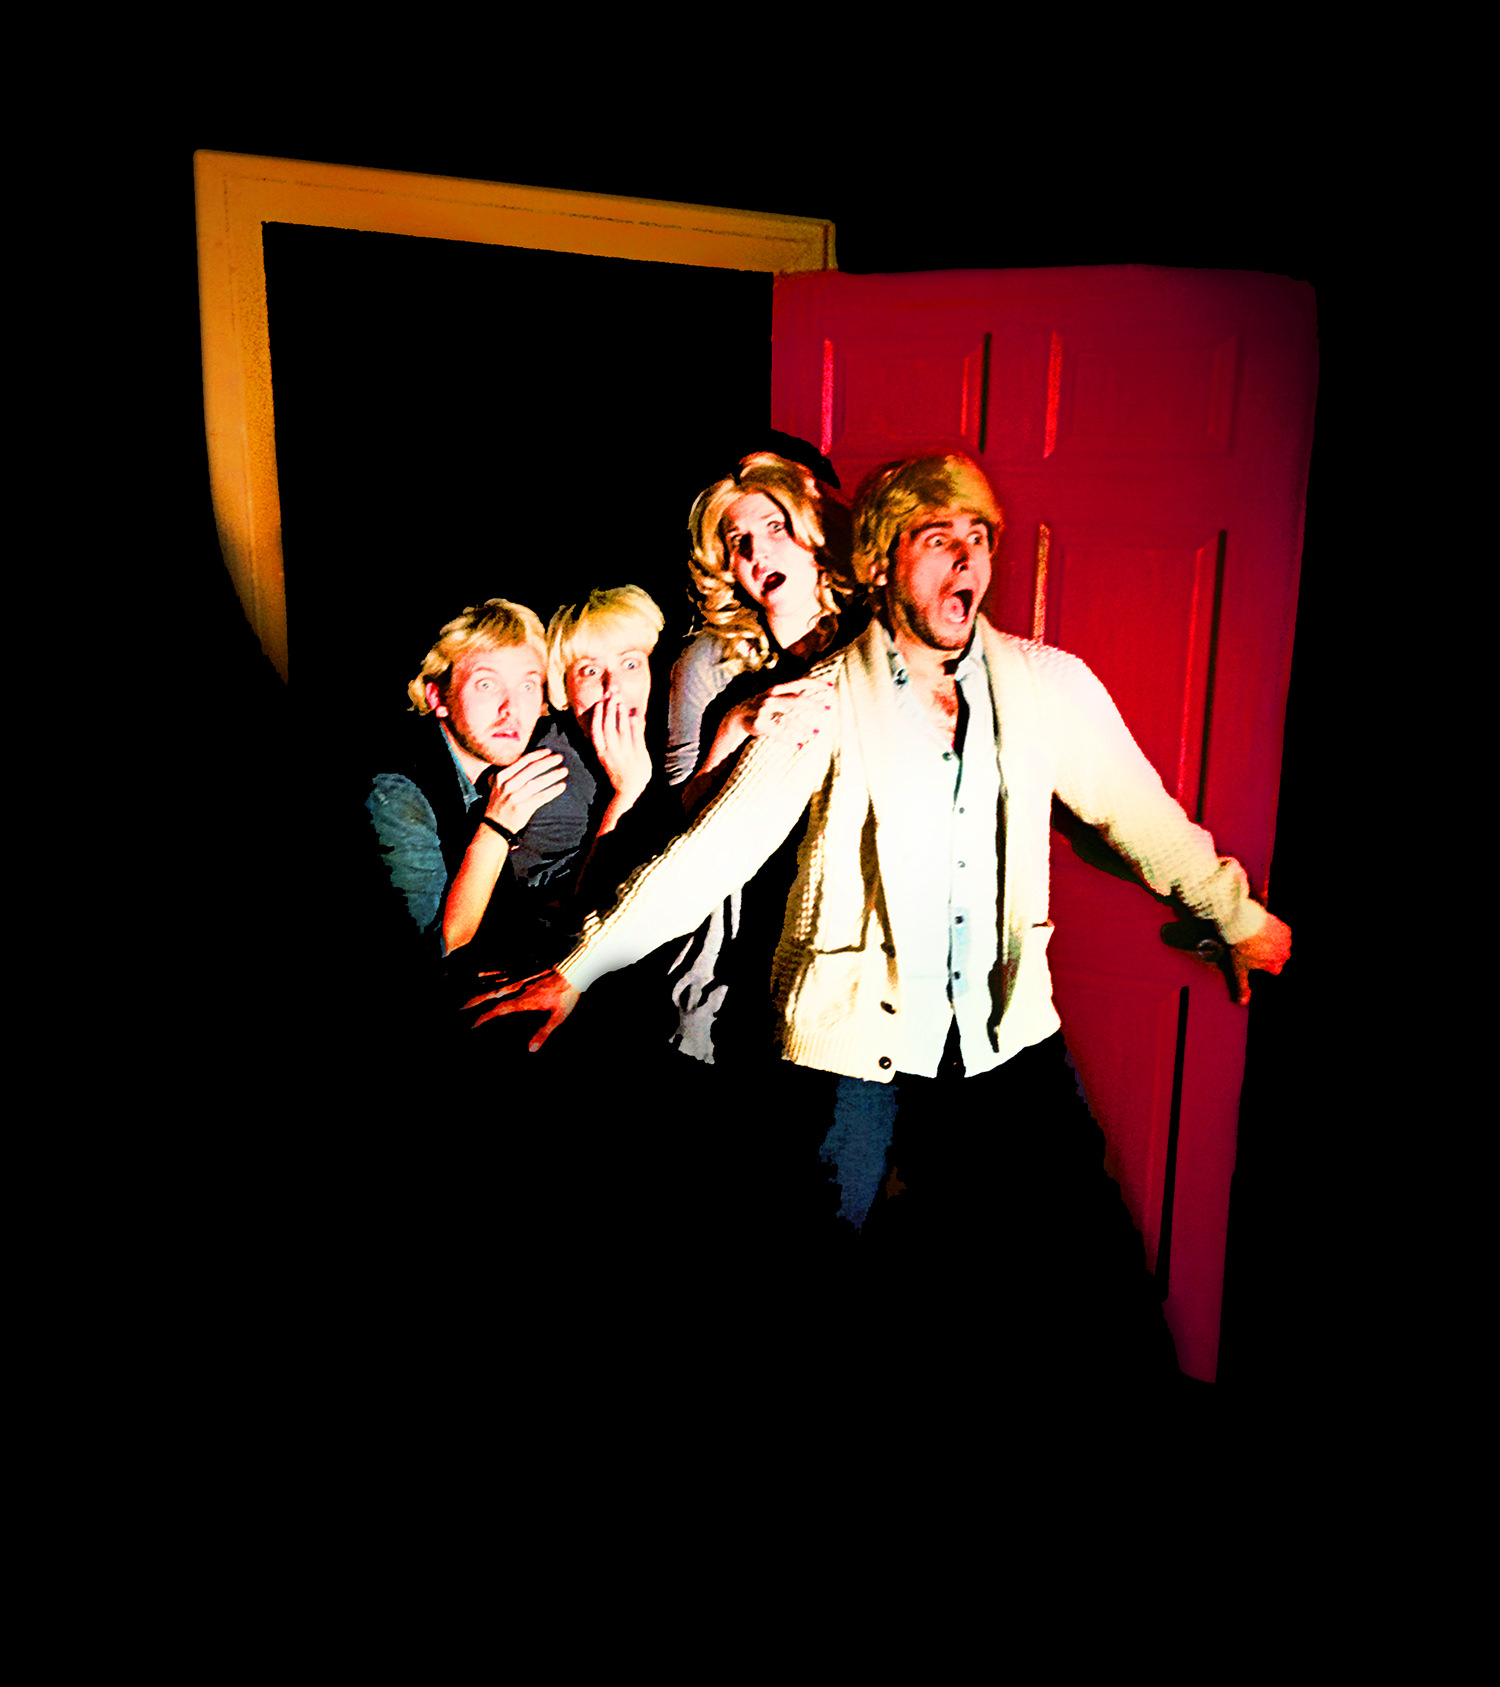 What horrors await the children (l to r, Matthew Arrington, Suzan M. Jacokes, Julie Spittle, Vince Kelley) in the attic? Find out in the hilarious parody, Flowers Up Her Attic, playing at Ferndale's Ringwald Theatre from October 13-29, 2012. Photo by Joe Plambeck.